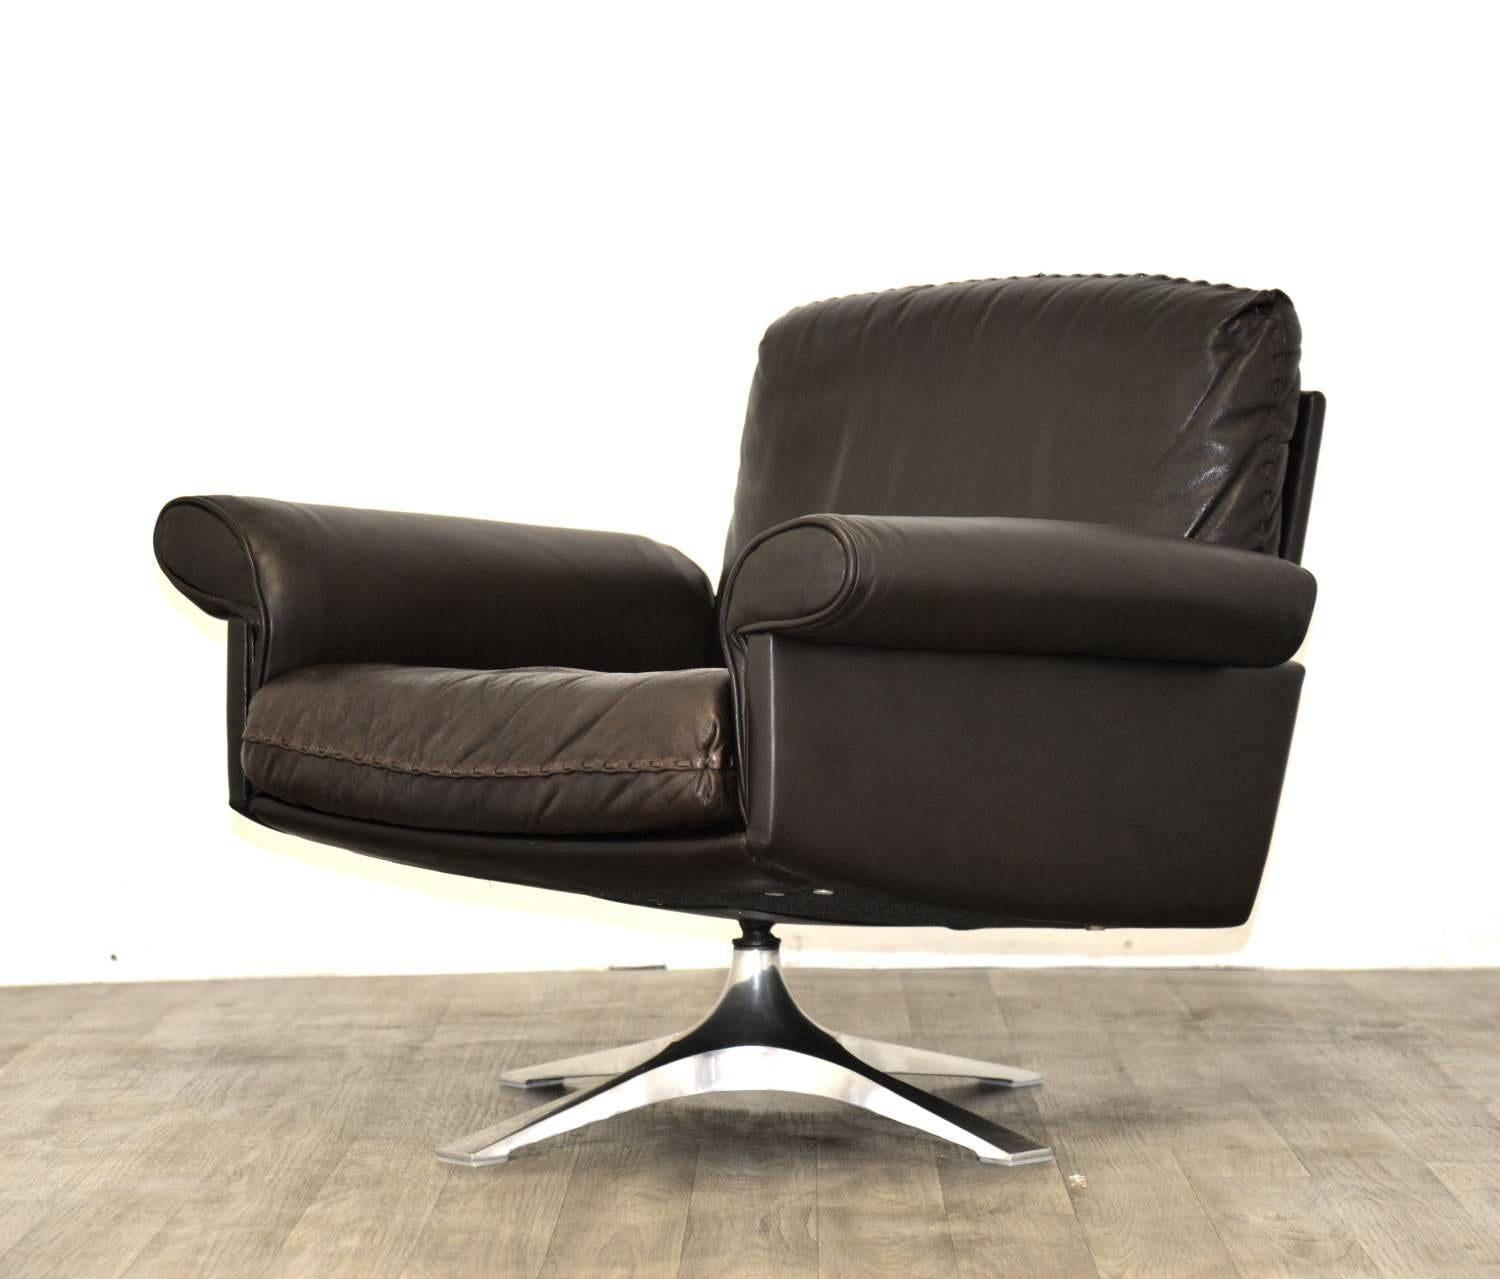 Discounted airfreight for our US Continent and international customers (from 2 weeks door to door)

The Cambridge Chair Company brings to you a vintage 1970s De Sede DS 31 swivel lounge armchair in soft dark chocolate brown aniline leather with